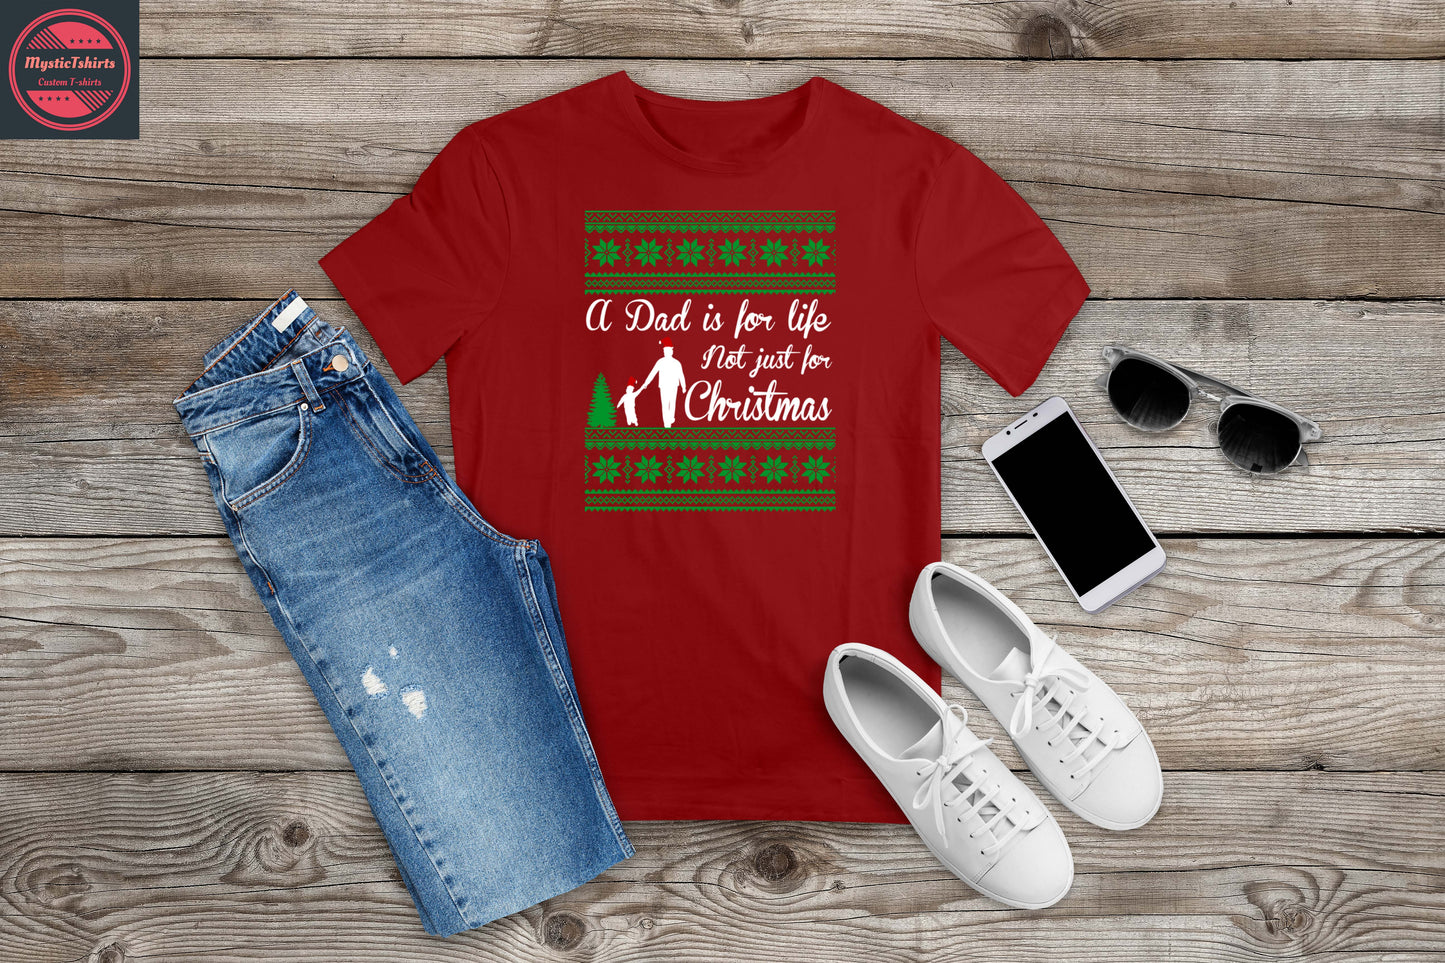 005. A DAD IS FOR LIFE NOT JUST FOR CHRISTMAS, Custom Made Shirt, Personalized T-Shirt, Custom Text, Make Your Own Shirt, Custom Tee